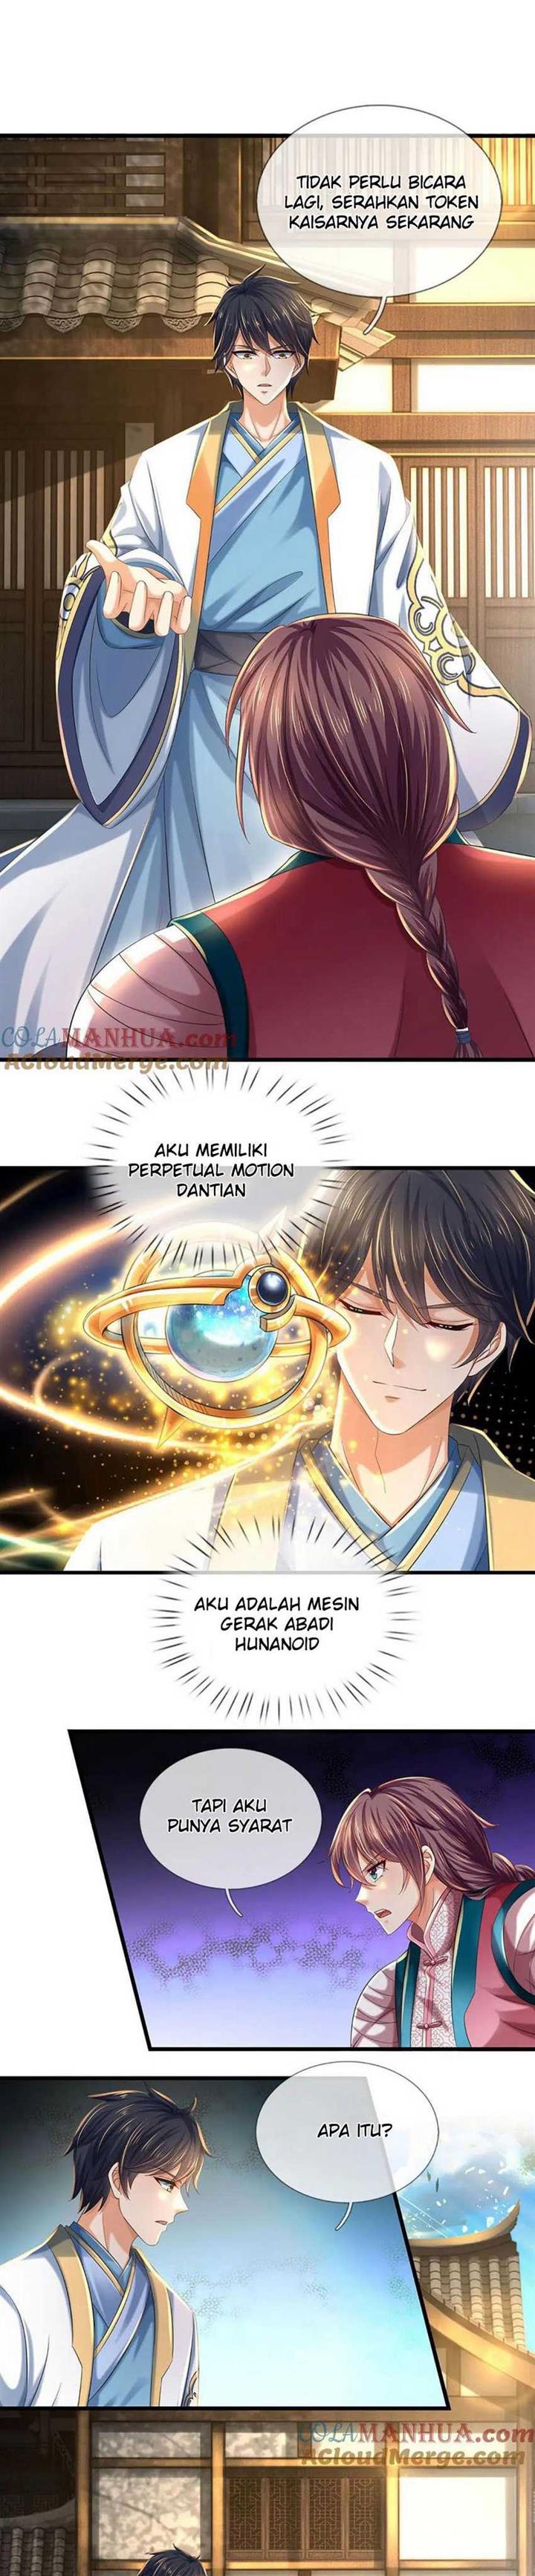 Star Sign In To Supreme Dantian Chapter 237